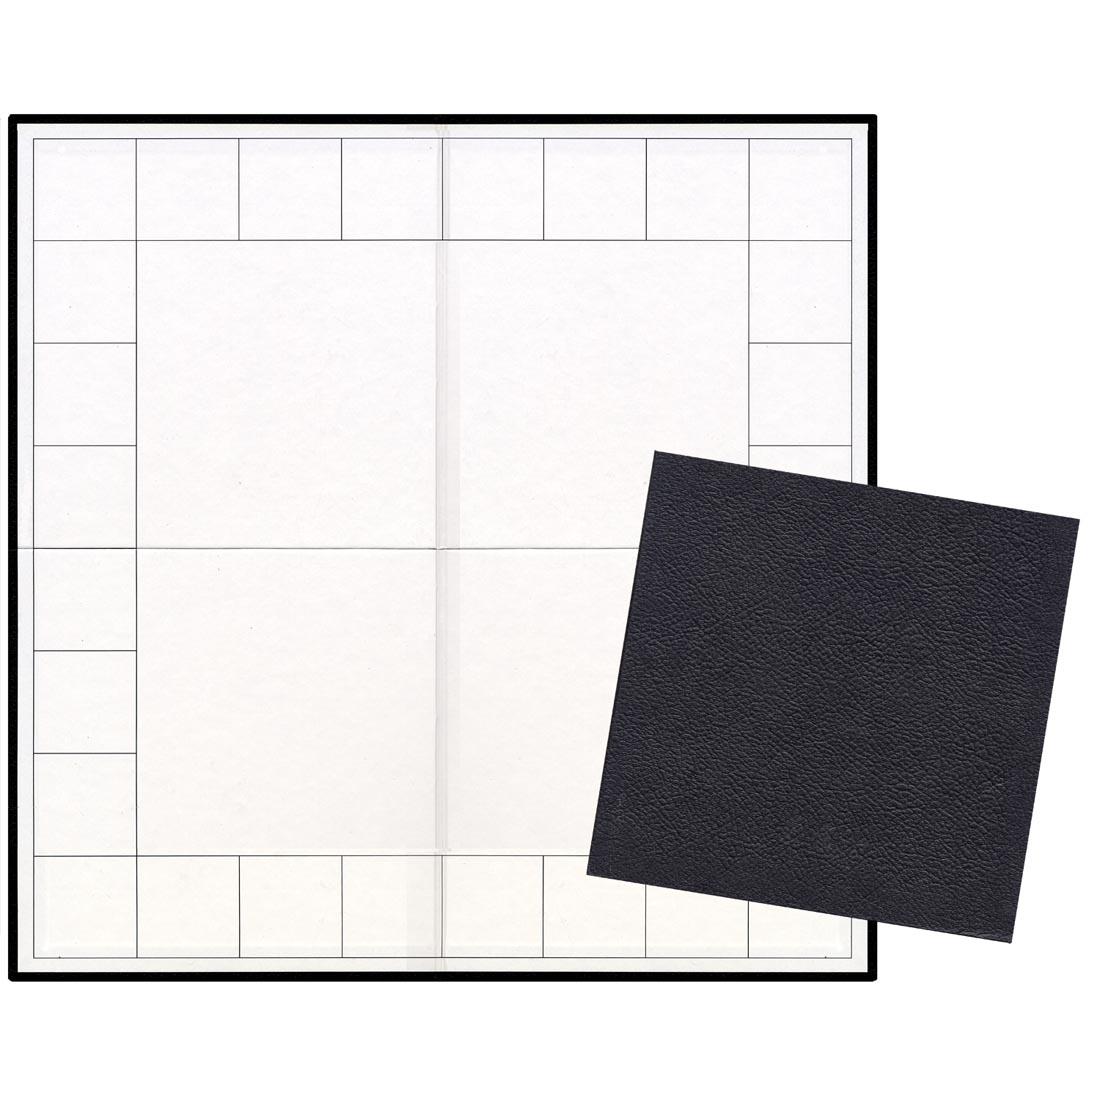 Simple Box Outline Game Board shown both open and folded